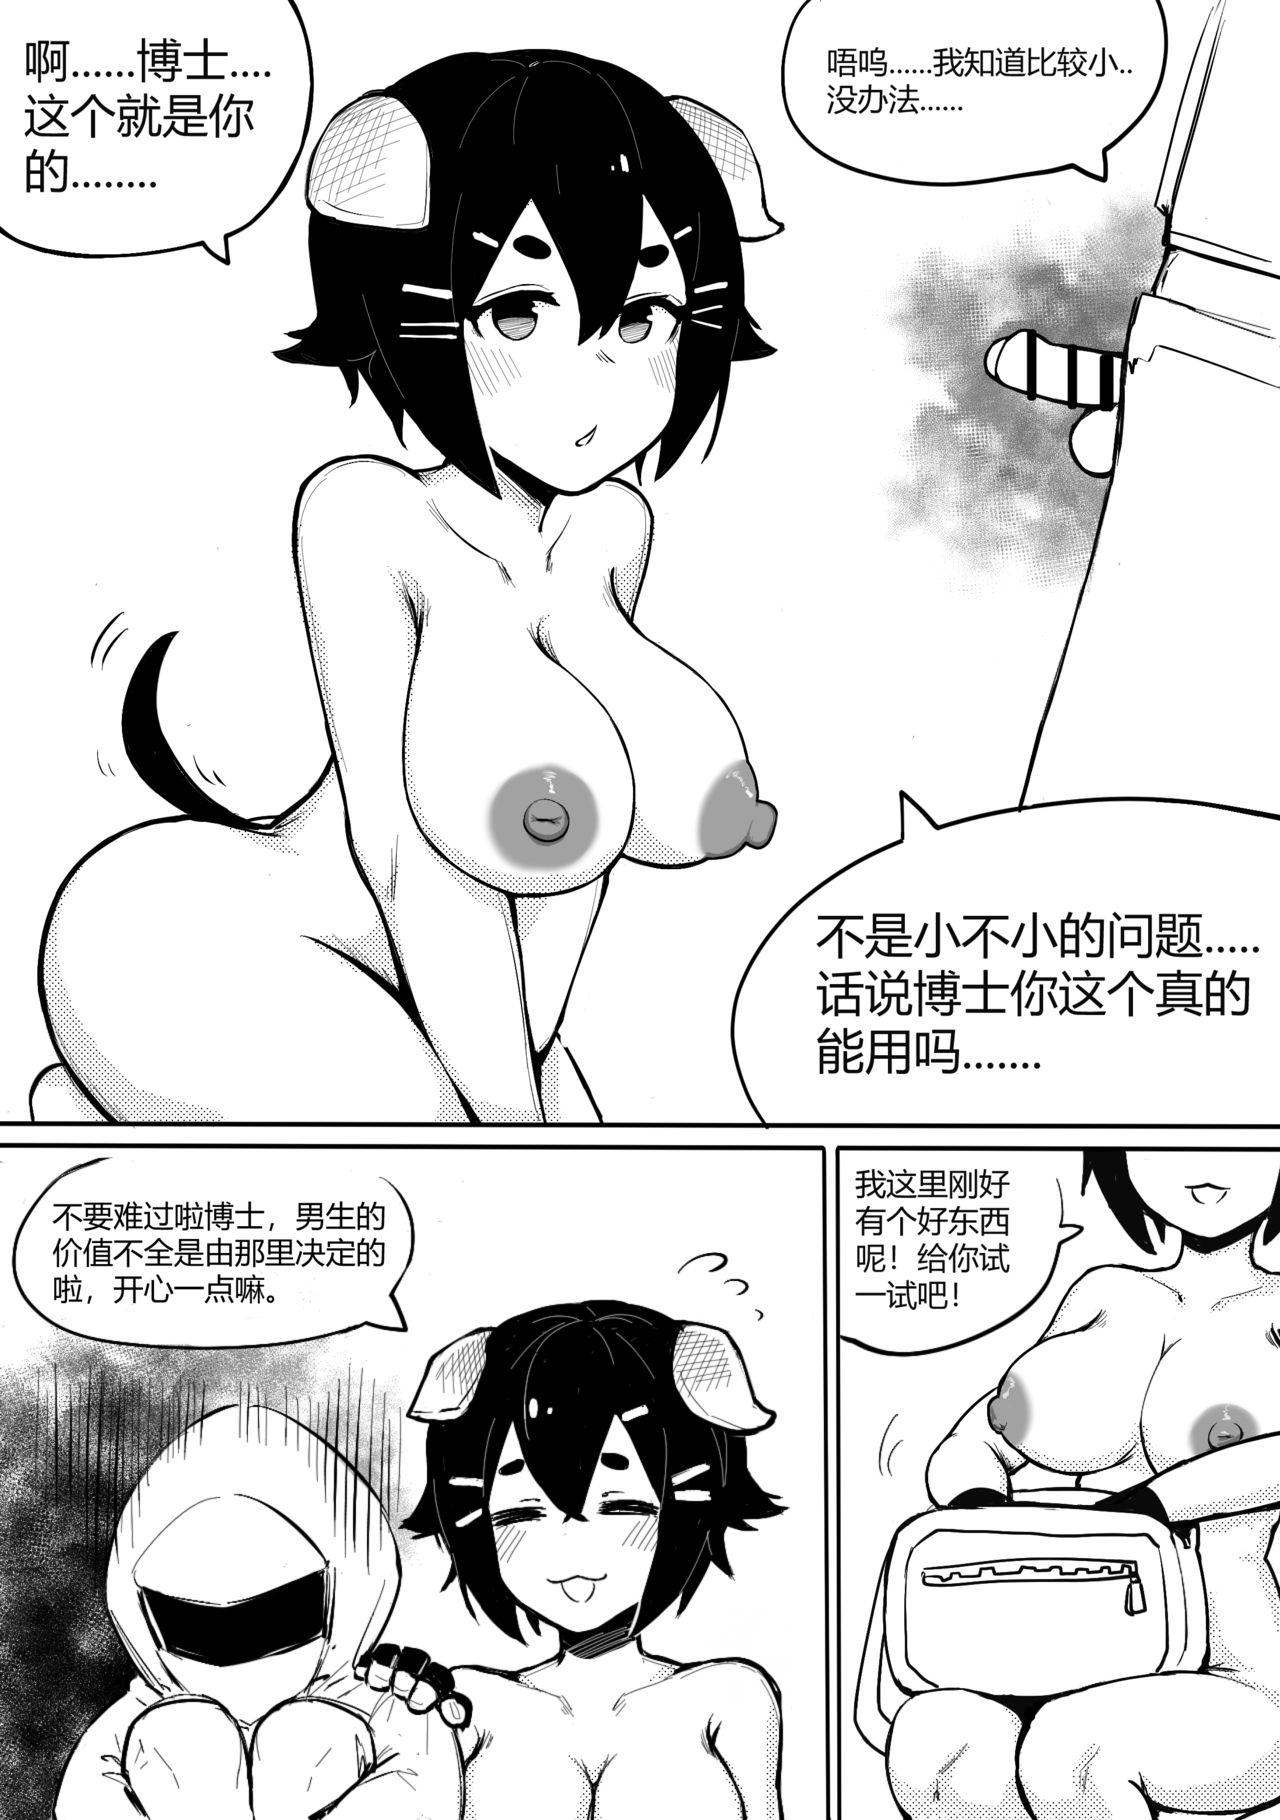 Spain 可爱的杰克【9P】（Arknights） - Arknights Women - Page 3